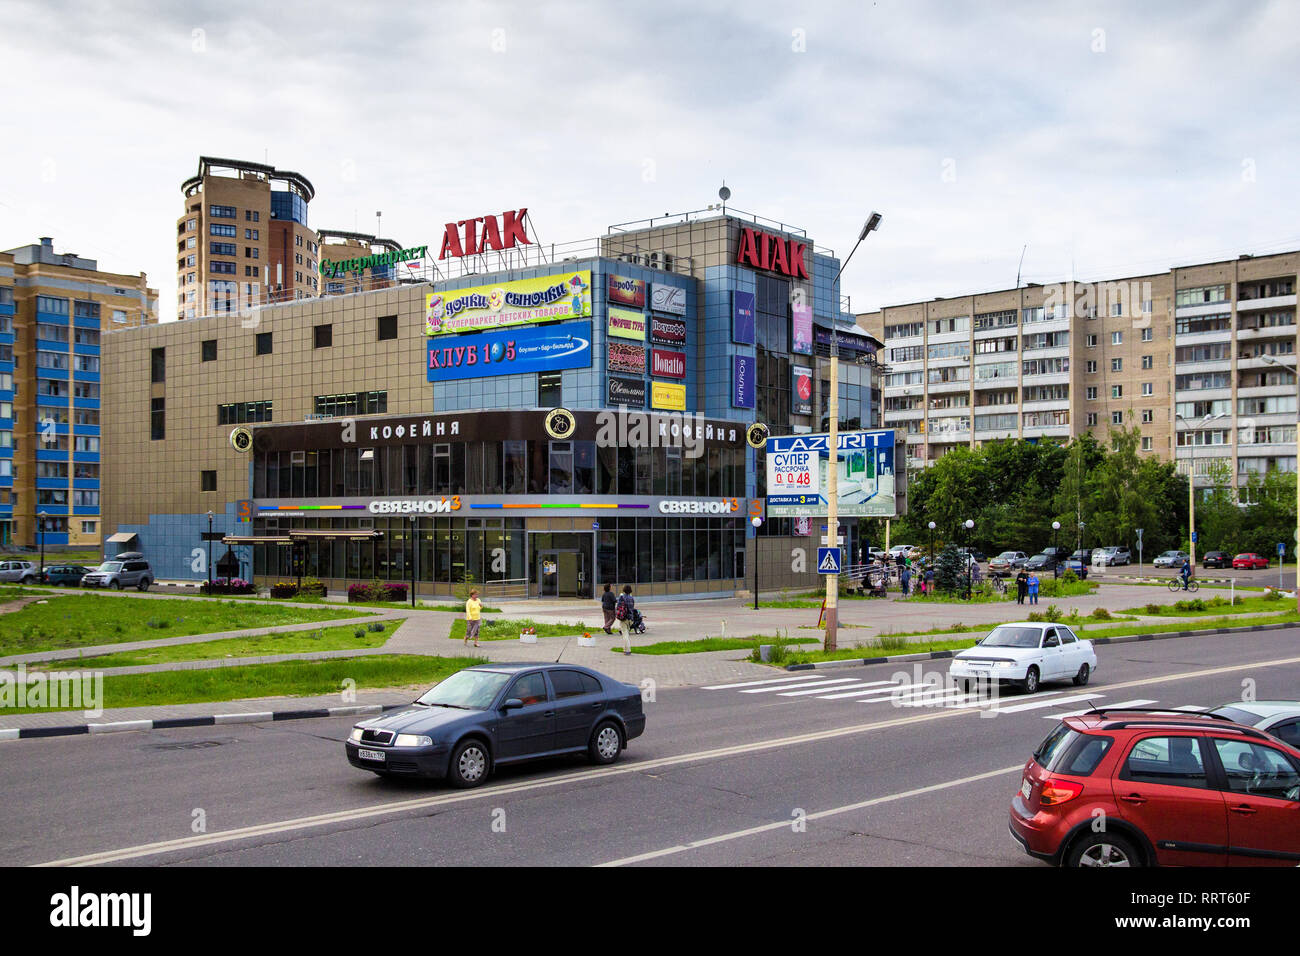 Dubna, Russia - Jul 11, 2014: Shopping complex with a shop Atak and second-largest independent handset retailer Svyaznoy. Stock Photo